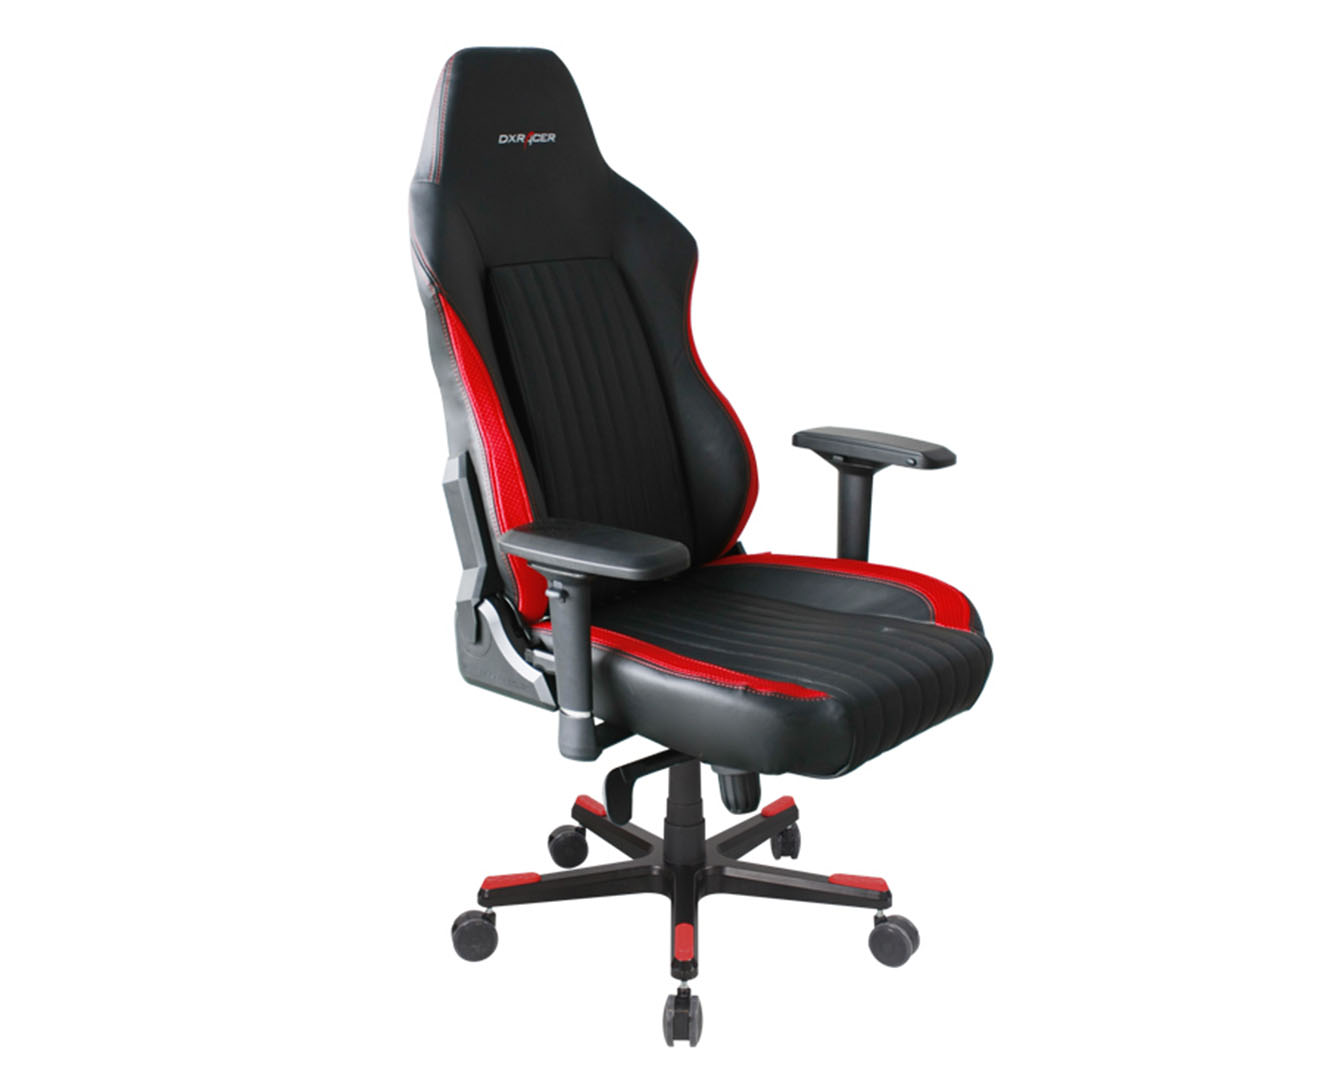  DXRacer Max  Series Executive Office Chair Black Red 